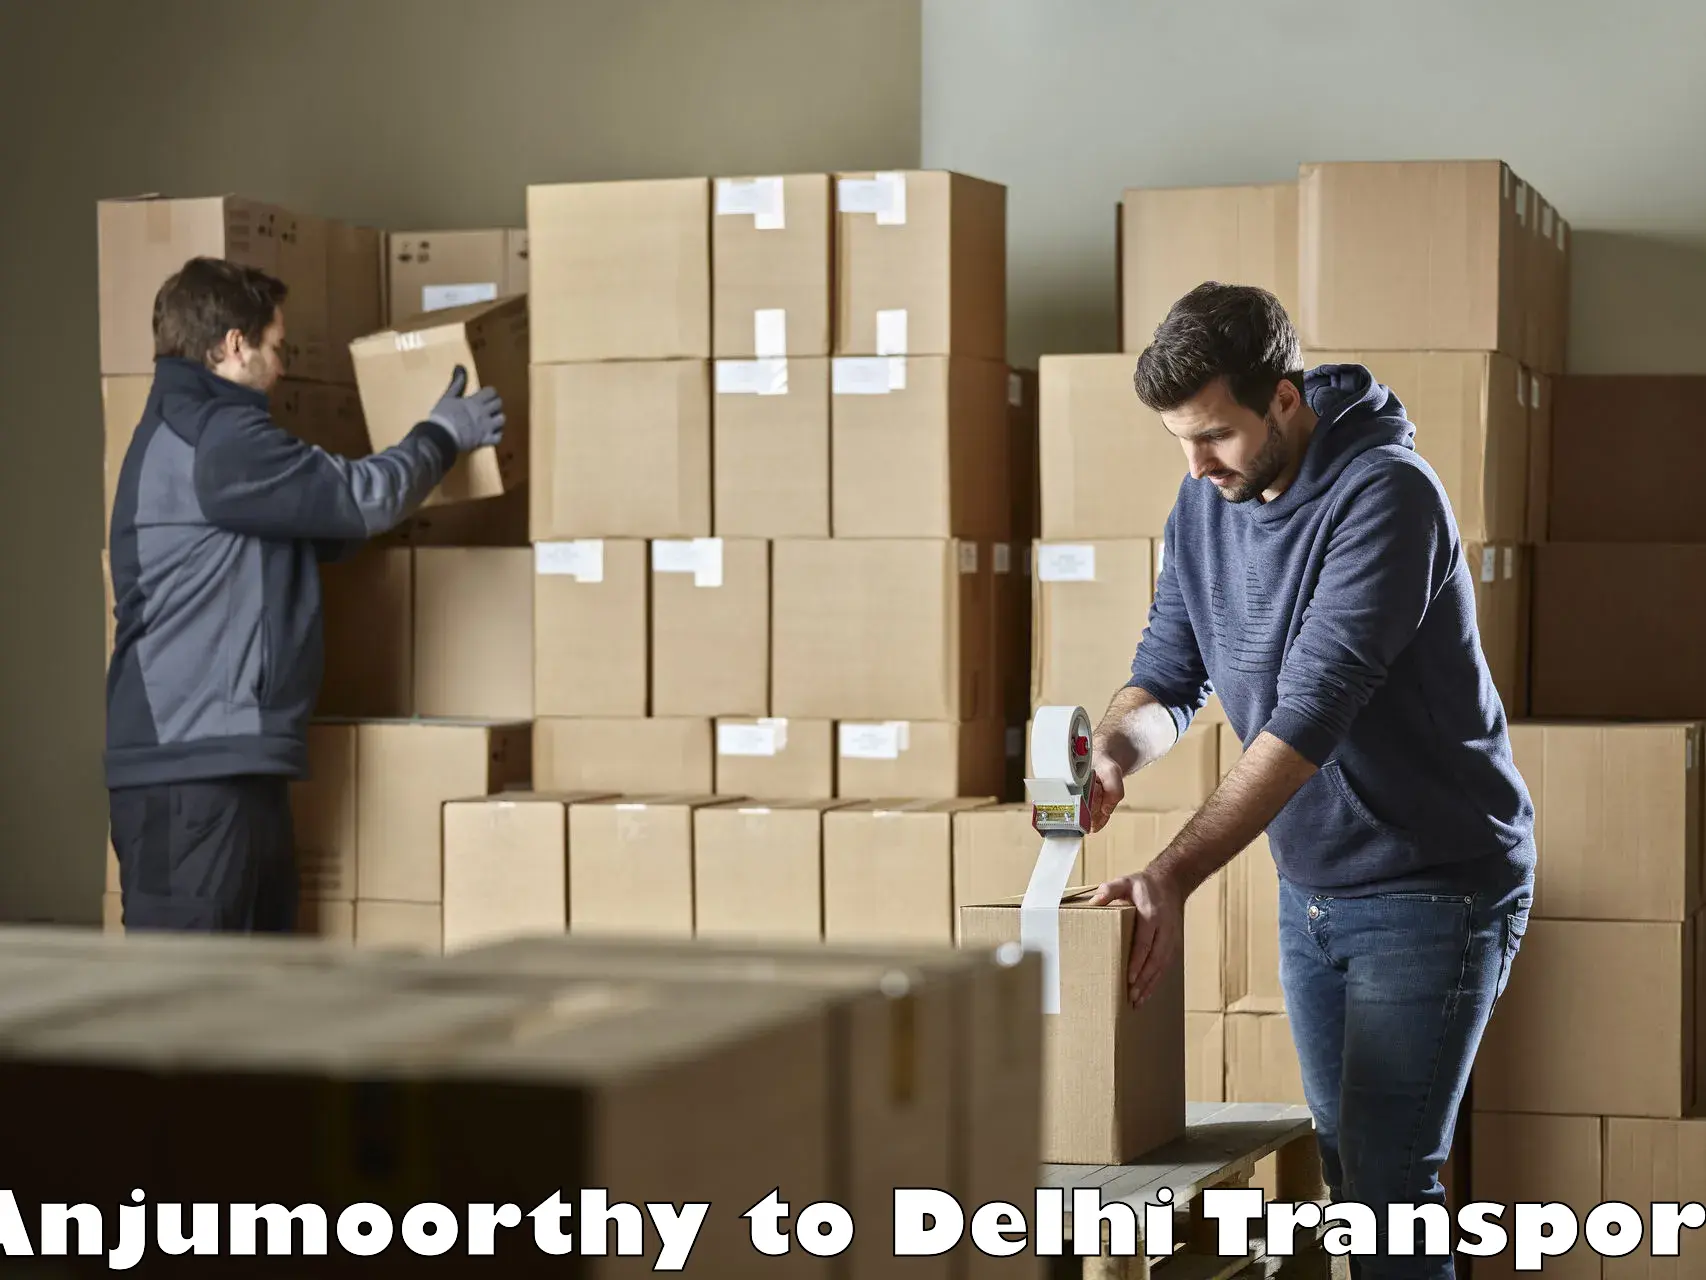 Daily parcel service transport Anjumoorthy to Jhilmil